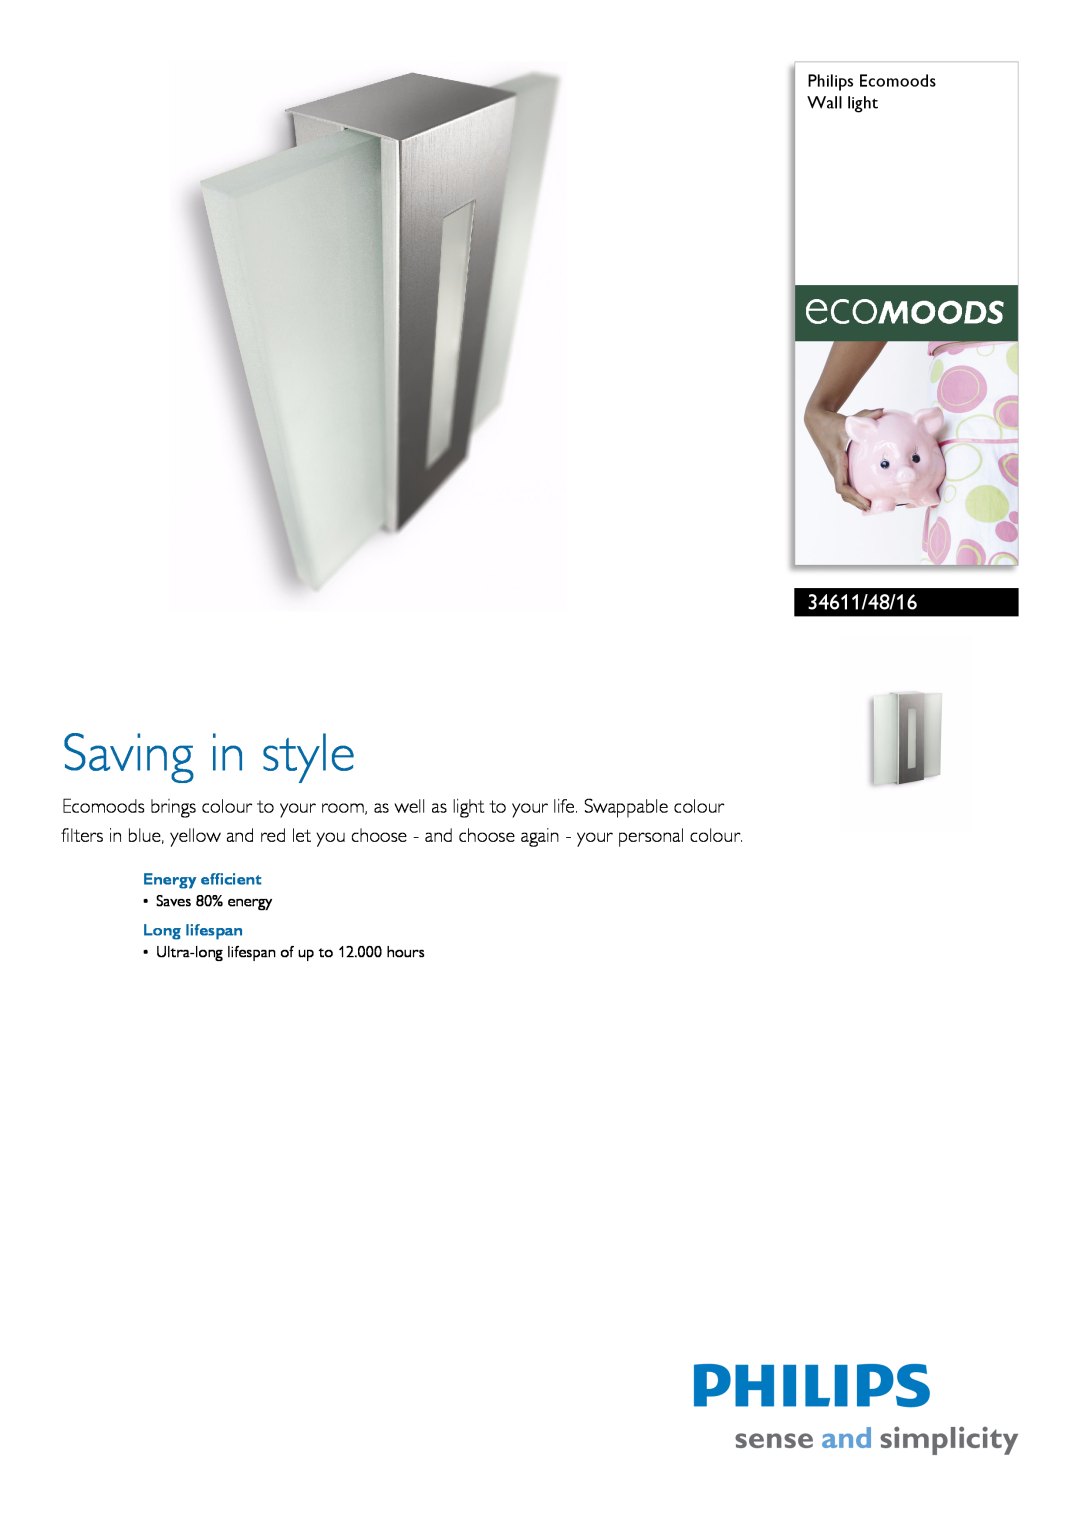 Philips 34611/48/16 manual Philips Ecomoods Wall light, Energy efficient, Long lifespan, Saving in style, Saves 80% energy 